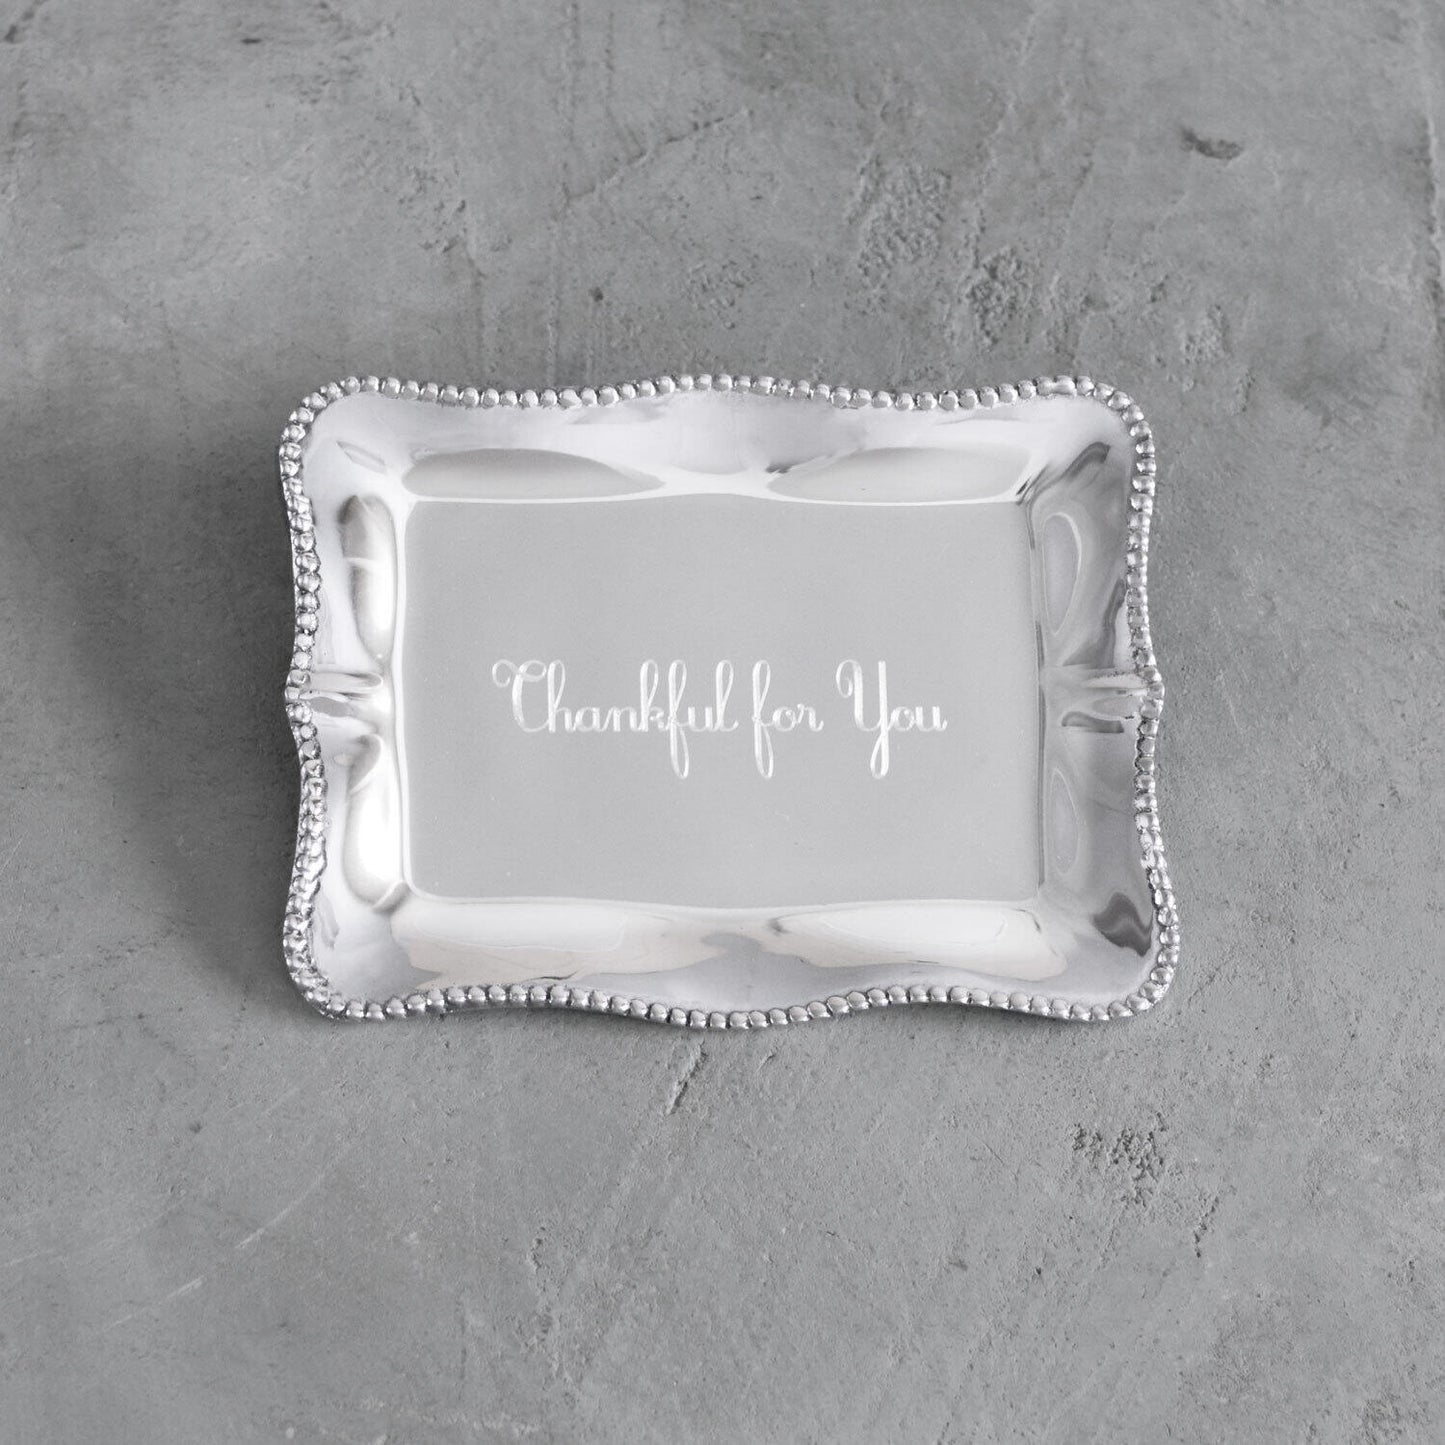 GIFTABLES Pearl Denisse Rectangular Engraved Tray - Thankful for You - Gaines Jewelers